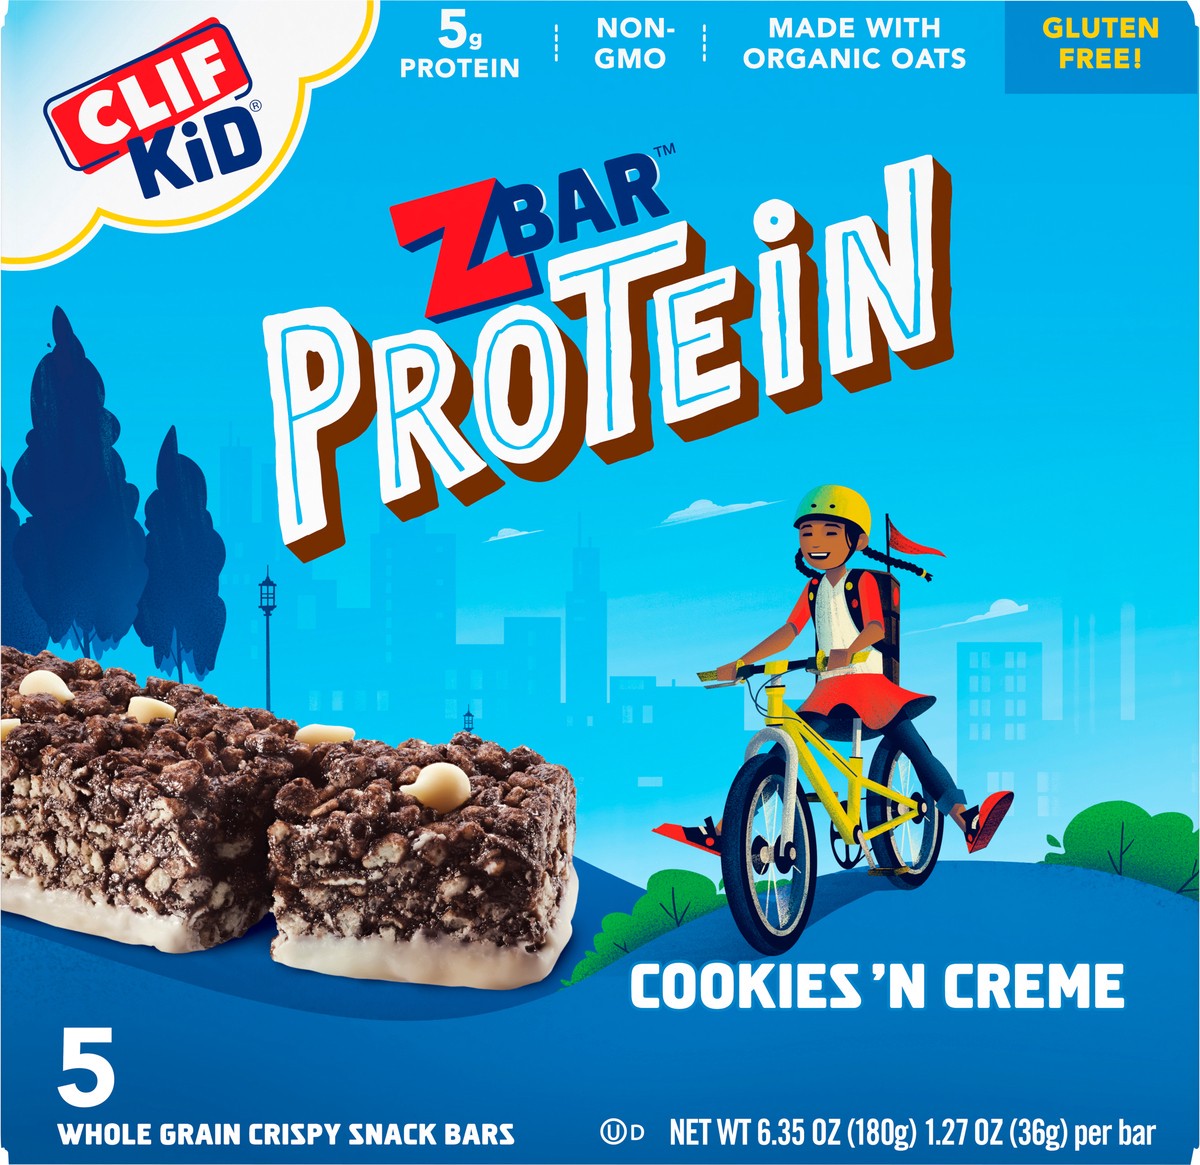 slide 6 of 9, Zbar Protein - Cookies 'n Creme - Crispy Whole Grain Snack Bars - Made with Organic Oats - Non-GMO - 5g Protein - 1.27 oz. (5 Pack), 5 ct; 6.35 oz